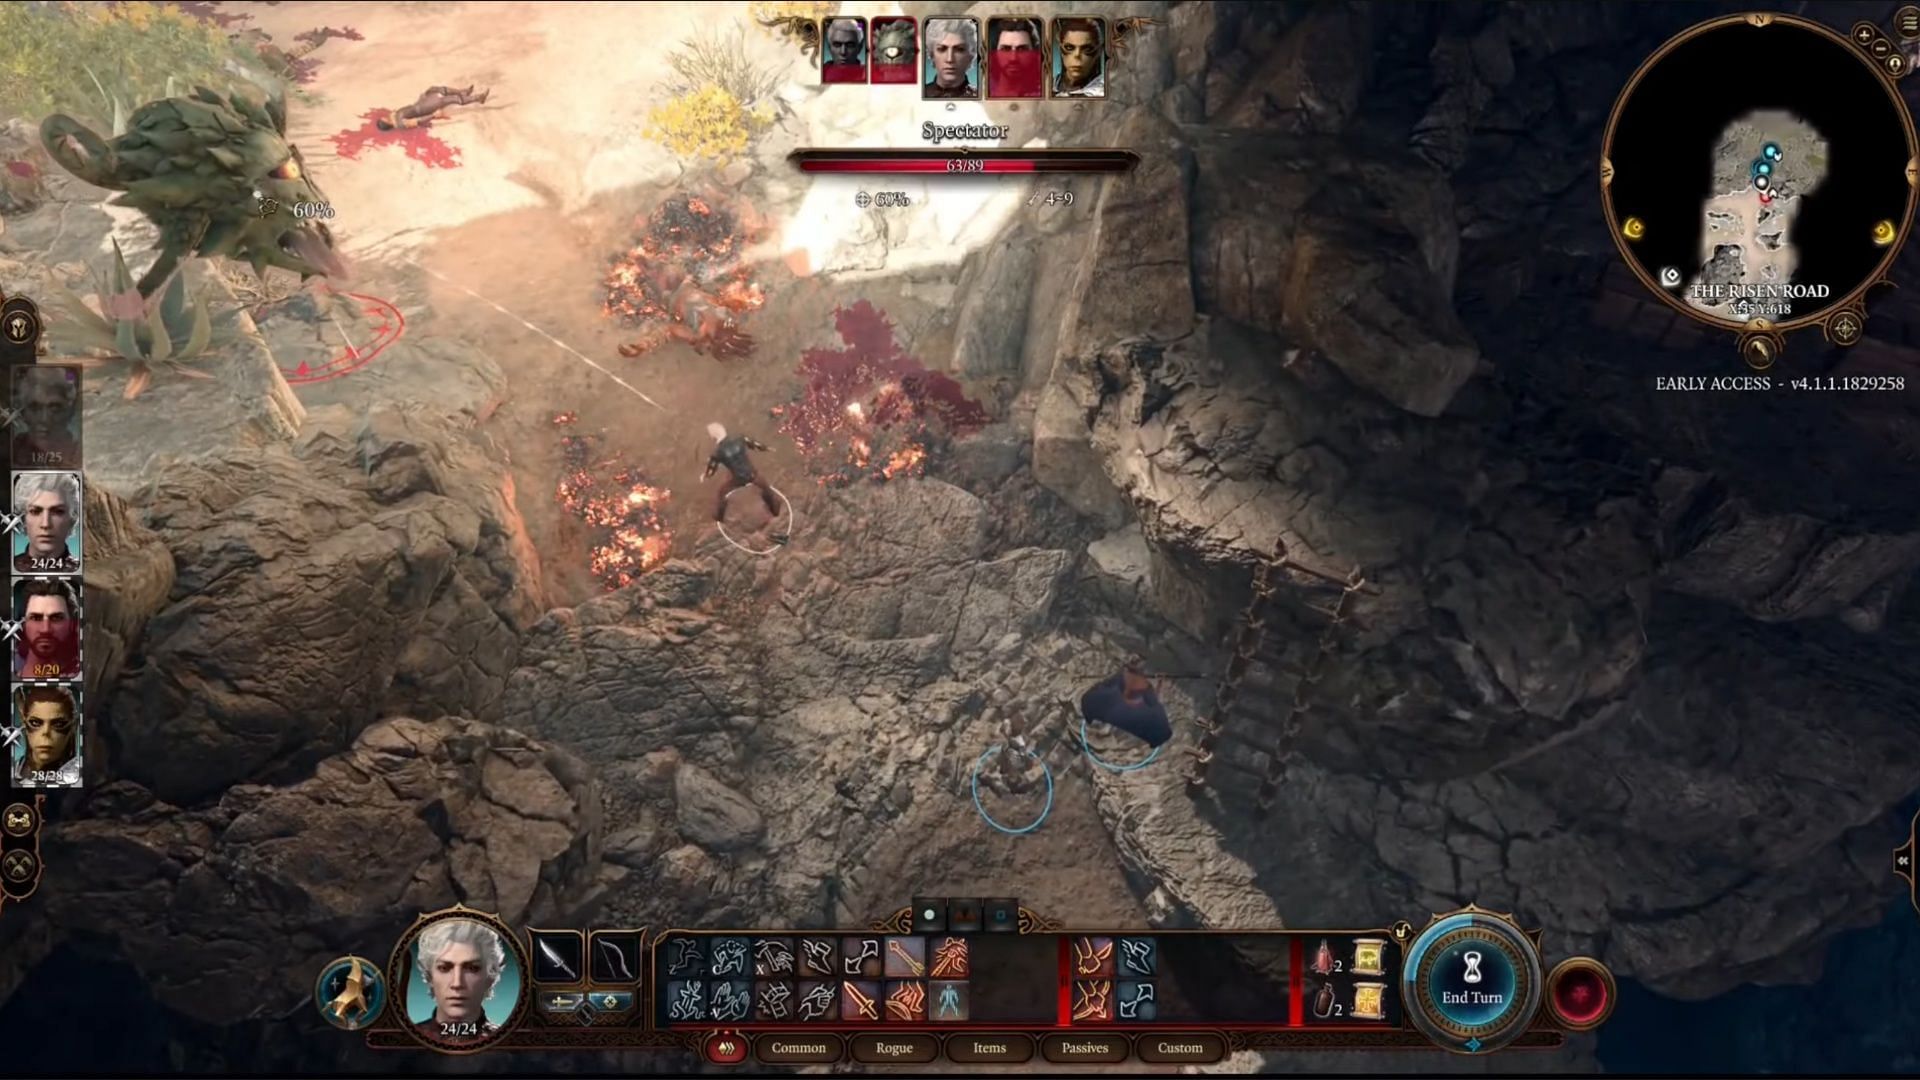 Opening the Iron Flask gives a dangerous boss fight (Image via Larian Studios)